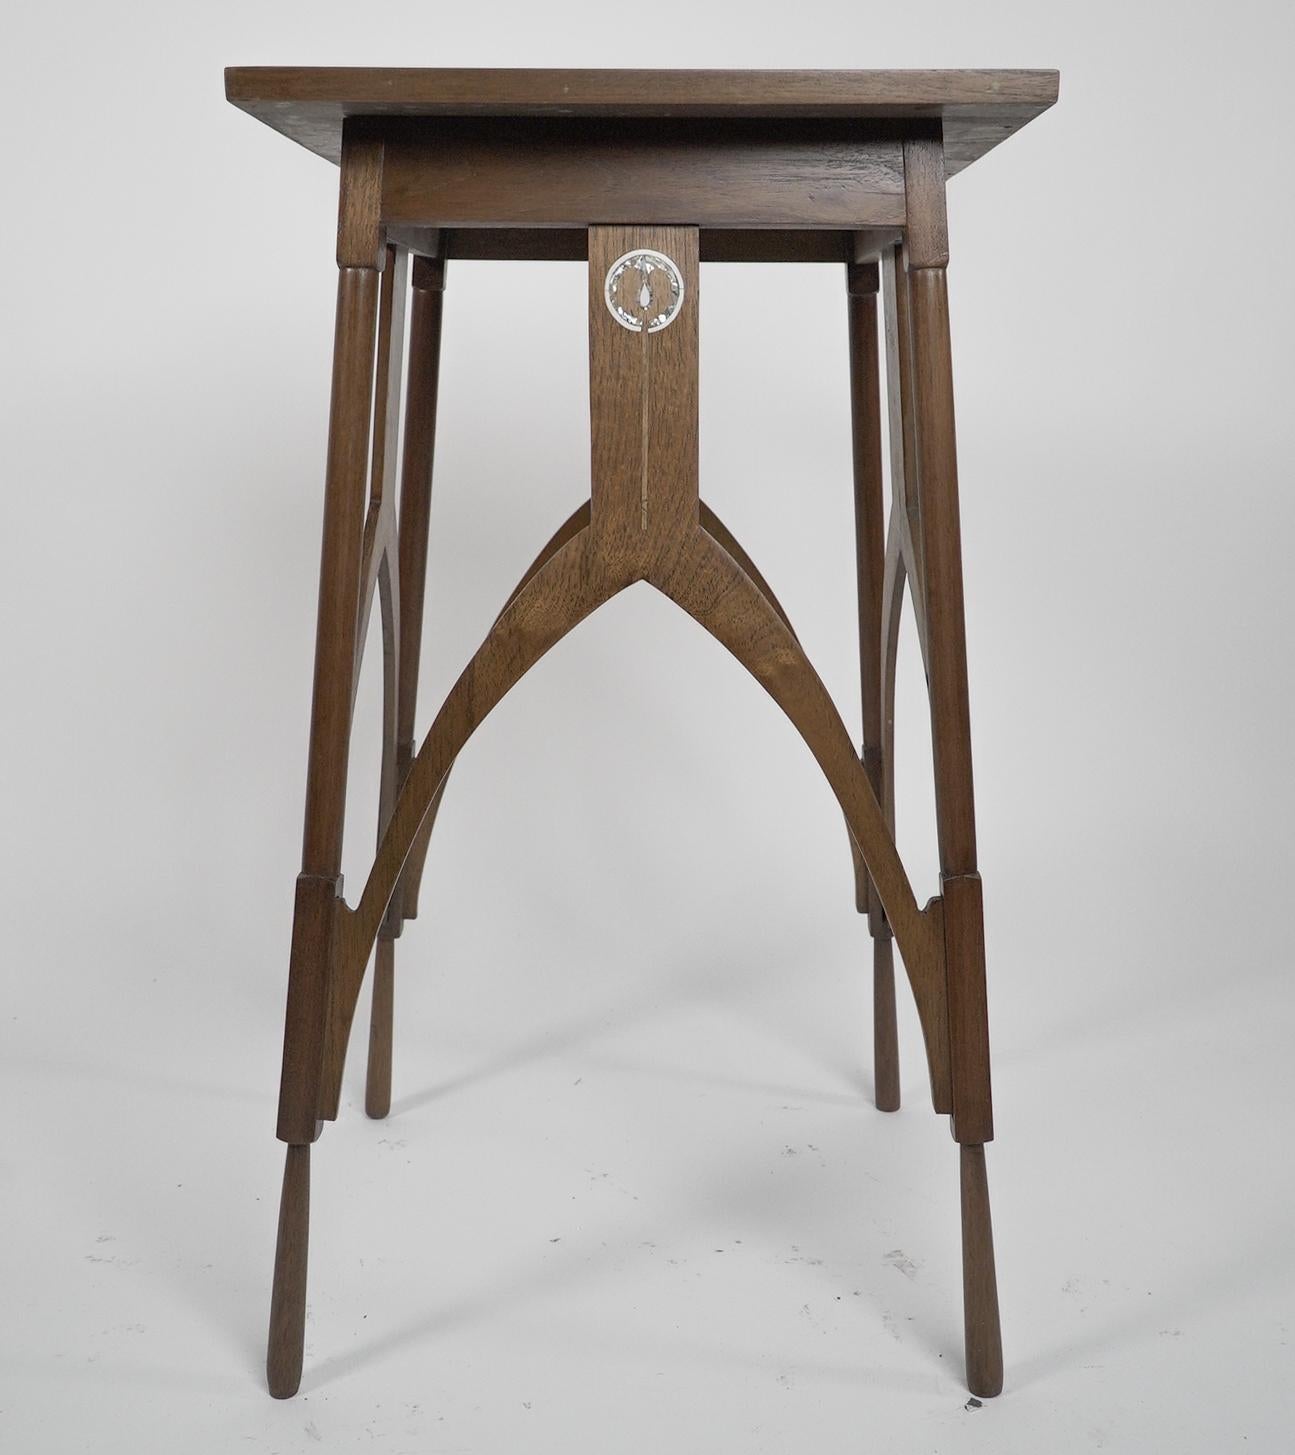 English Baillie Scott style, A Walnut side table inlaid with Mother-of-Pearl decoration. For Sale